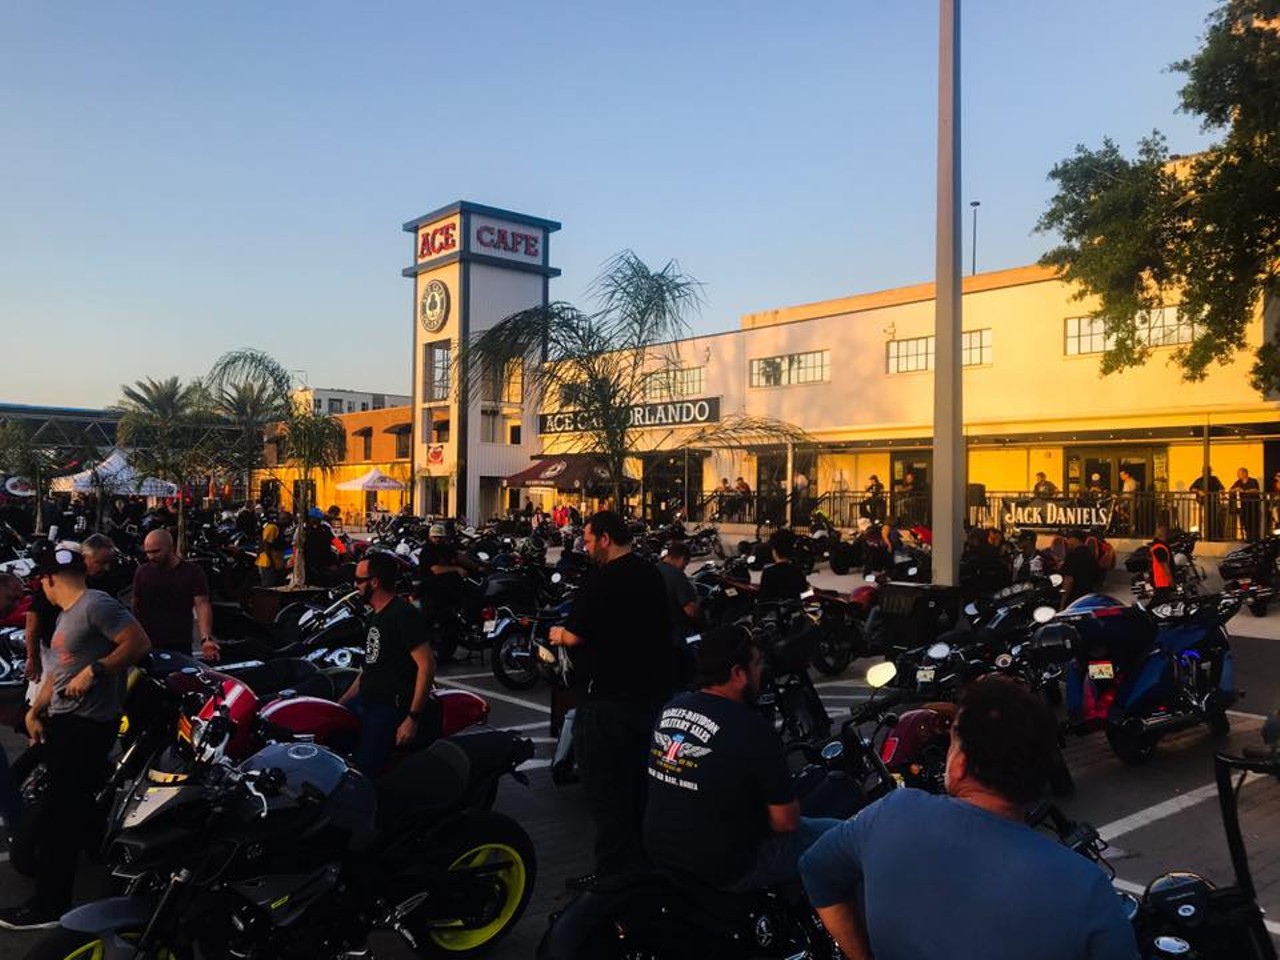 Ace Cafe Orlando
100 W. Livingston Street, 407-996-6686
Biker bars are always fun. The road hogs of yesteryear would be proud of this motor cafe featuring a menu reminisce of an old countryside diner. Leather jackets are encouraged. 
Photo via Ace Cafe/Facebook